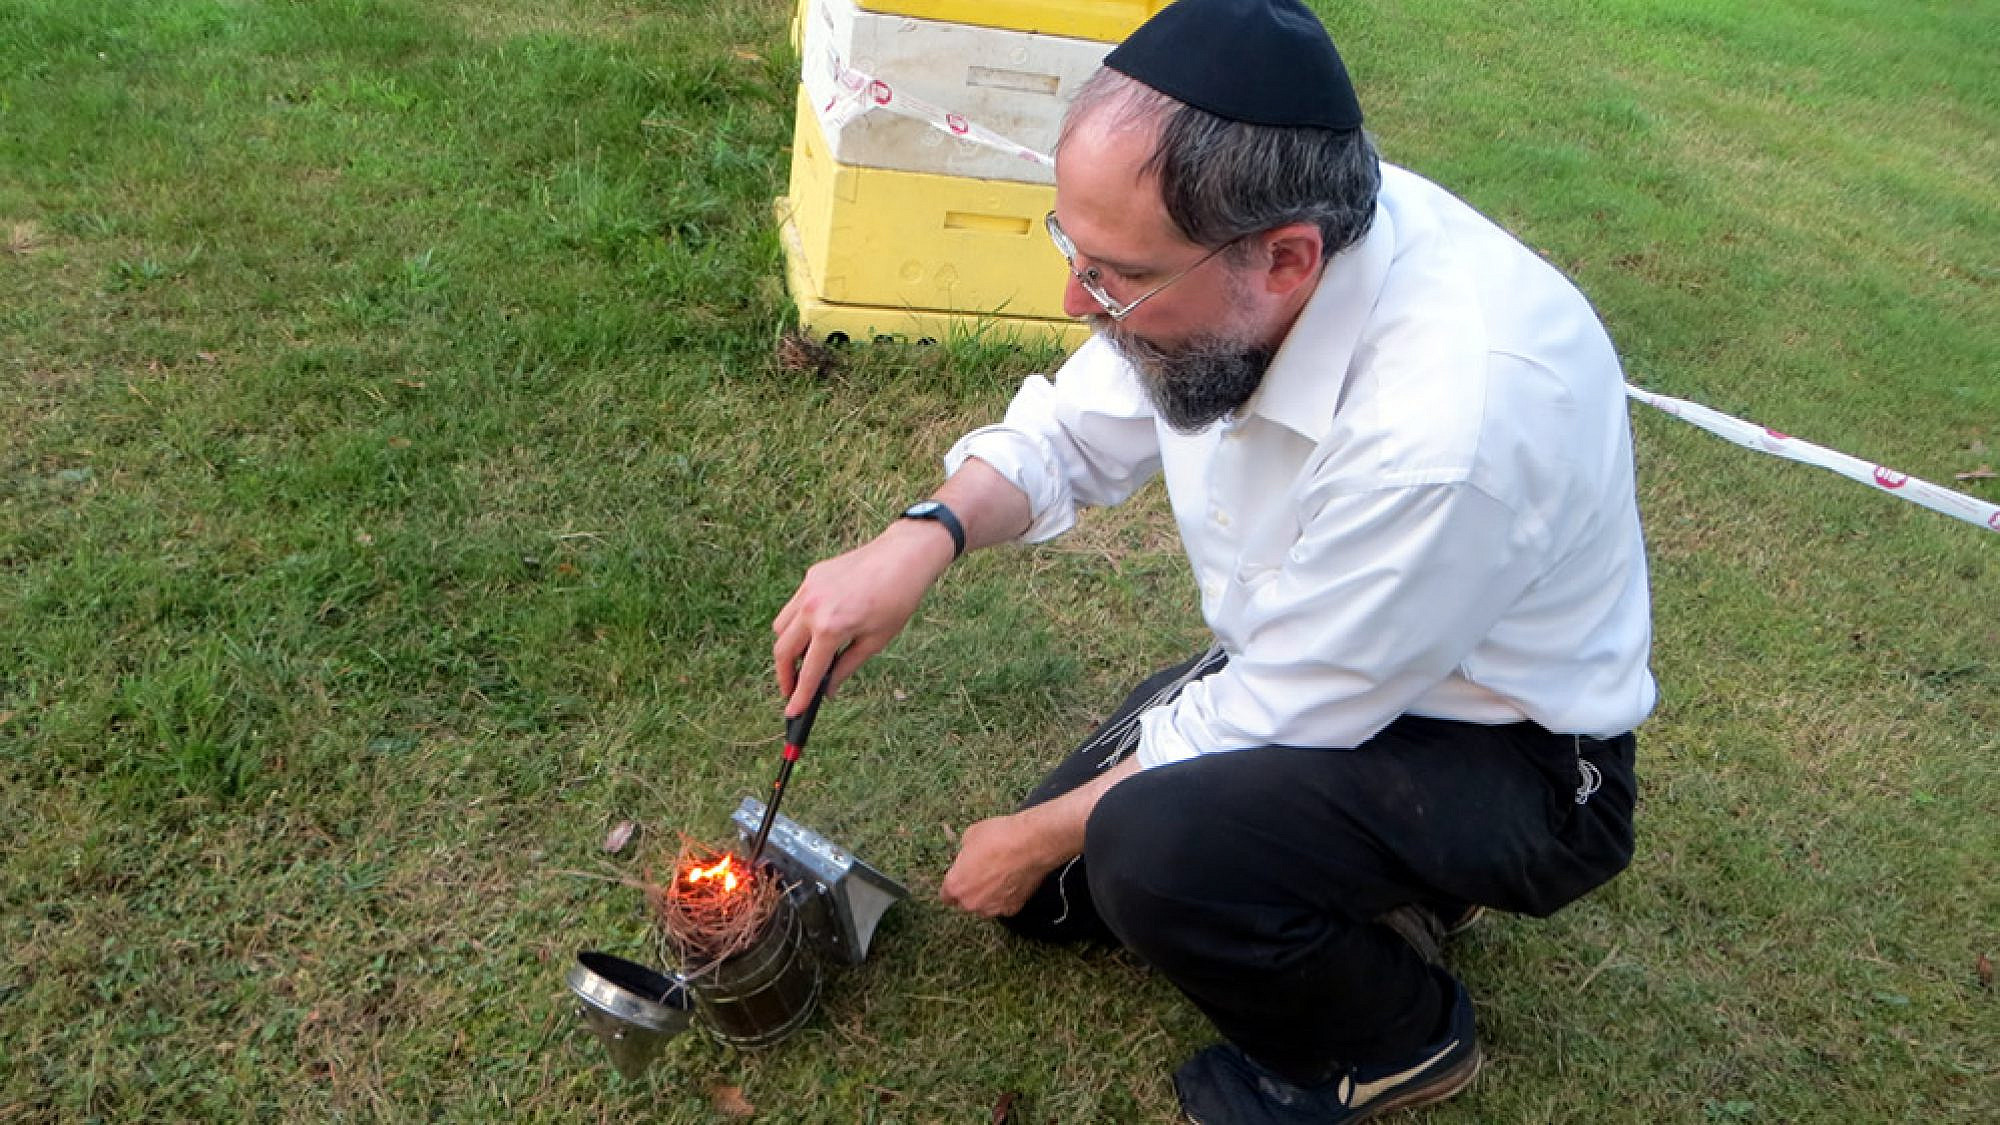 Rabbi Avraham Laber, co-director of Chabad-Lubavitch of Southern Rensselaer County in New York, uses smoke to calm honey bees before opening a hive. Photo by Carin M. Smilk.